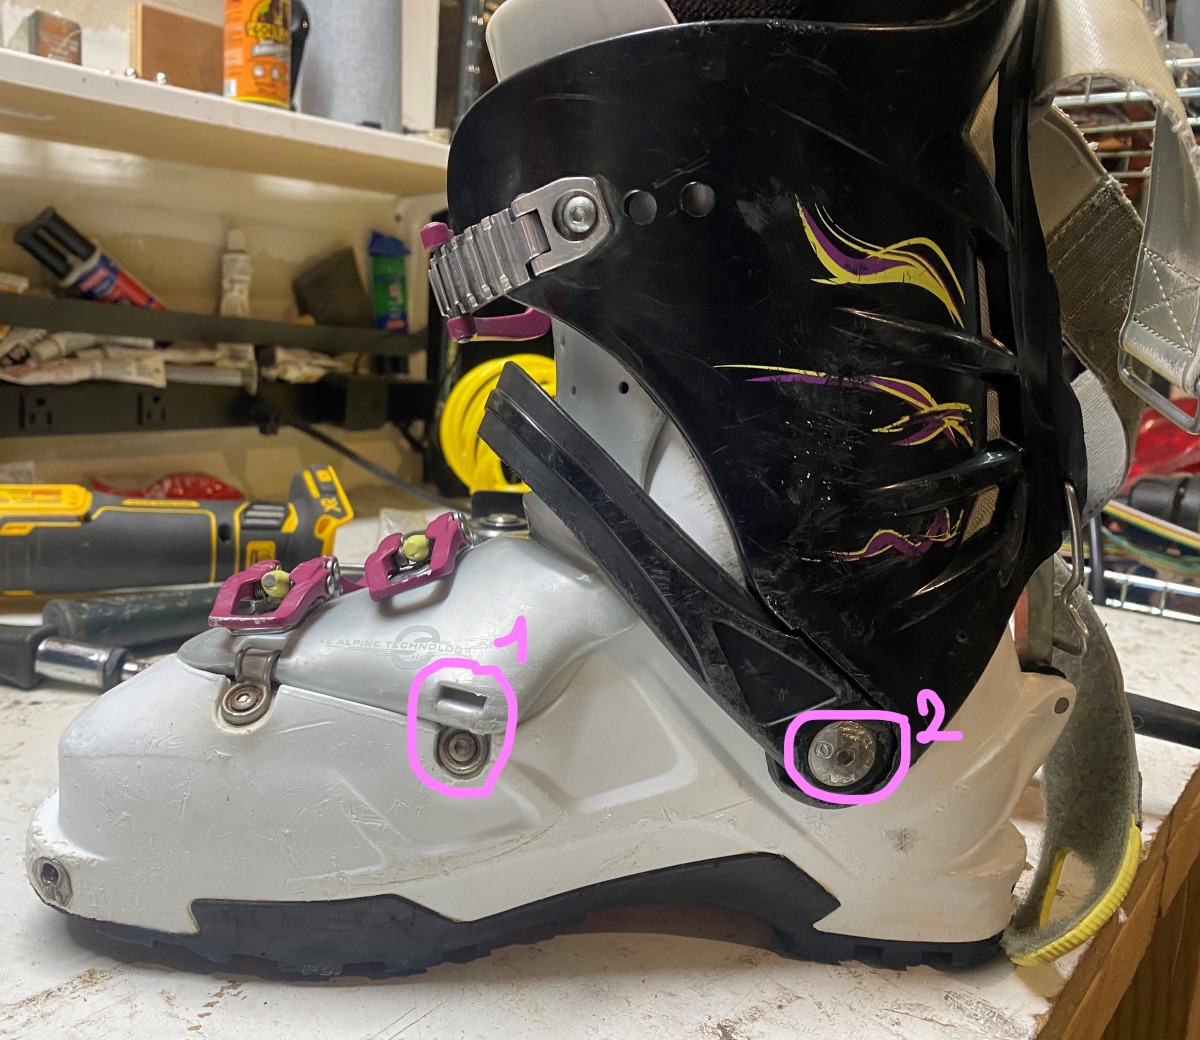 Circle #1 shows a missing hinge, which in the case of this particular boot doesn't impact its functionality and is also easily replaceable. Circle #2 shows a common part to go missing, make sure to check that it is in its place. These pivots can wear out and develop play which is nearly impossible to fix and will affect ski performance. One way to check for this is by wiggling the cuff of the boot in ski mode, checking for play.